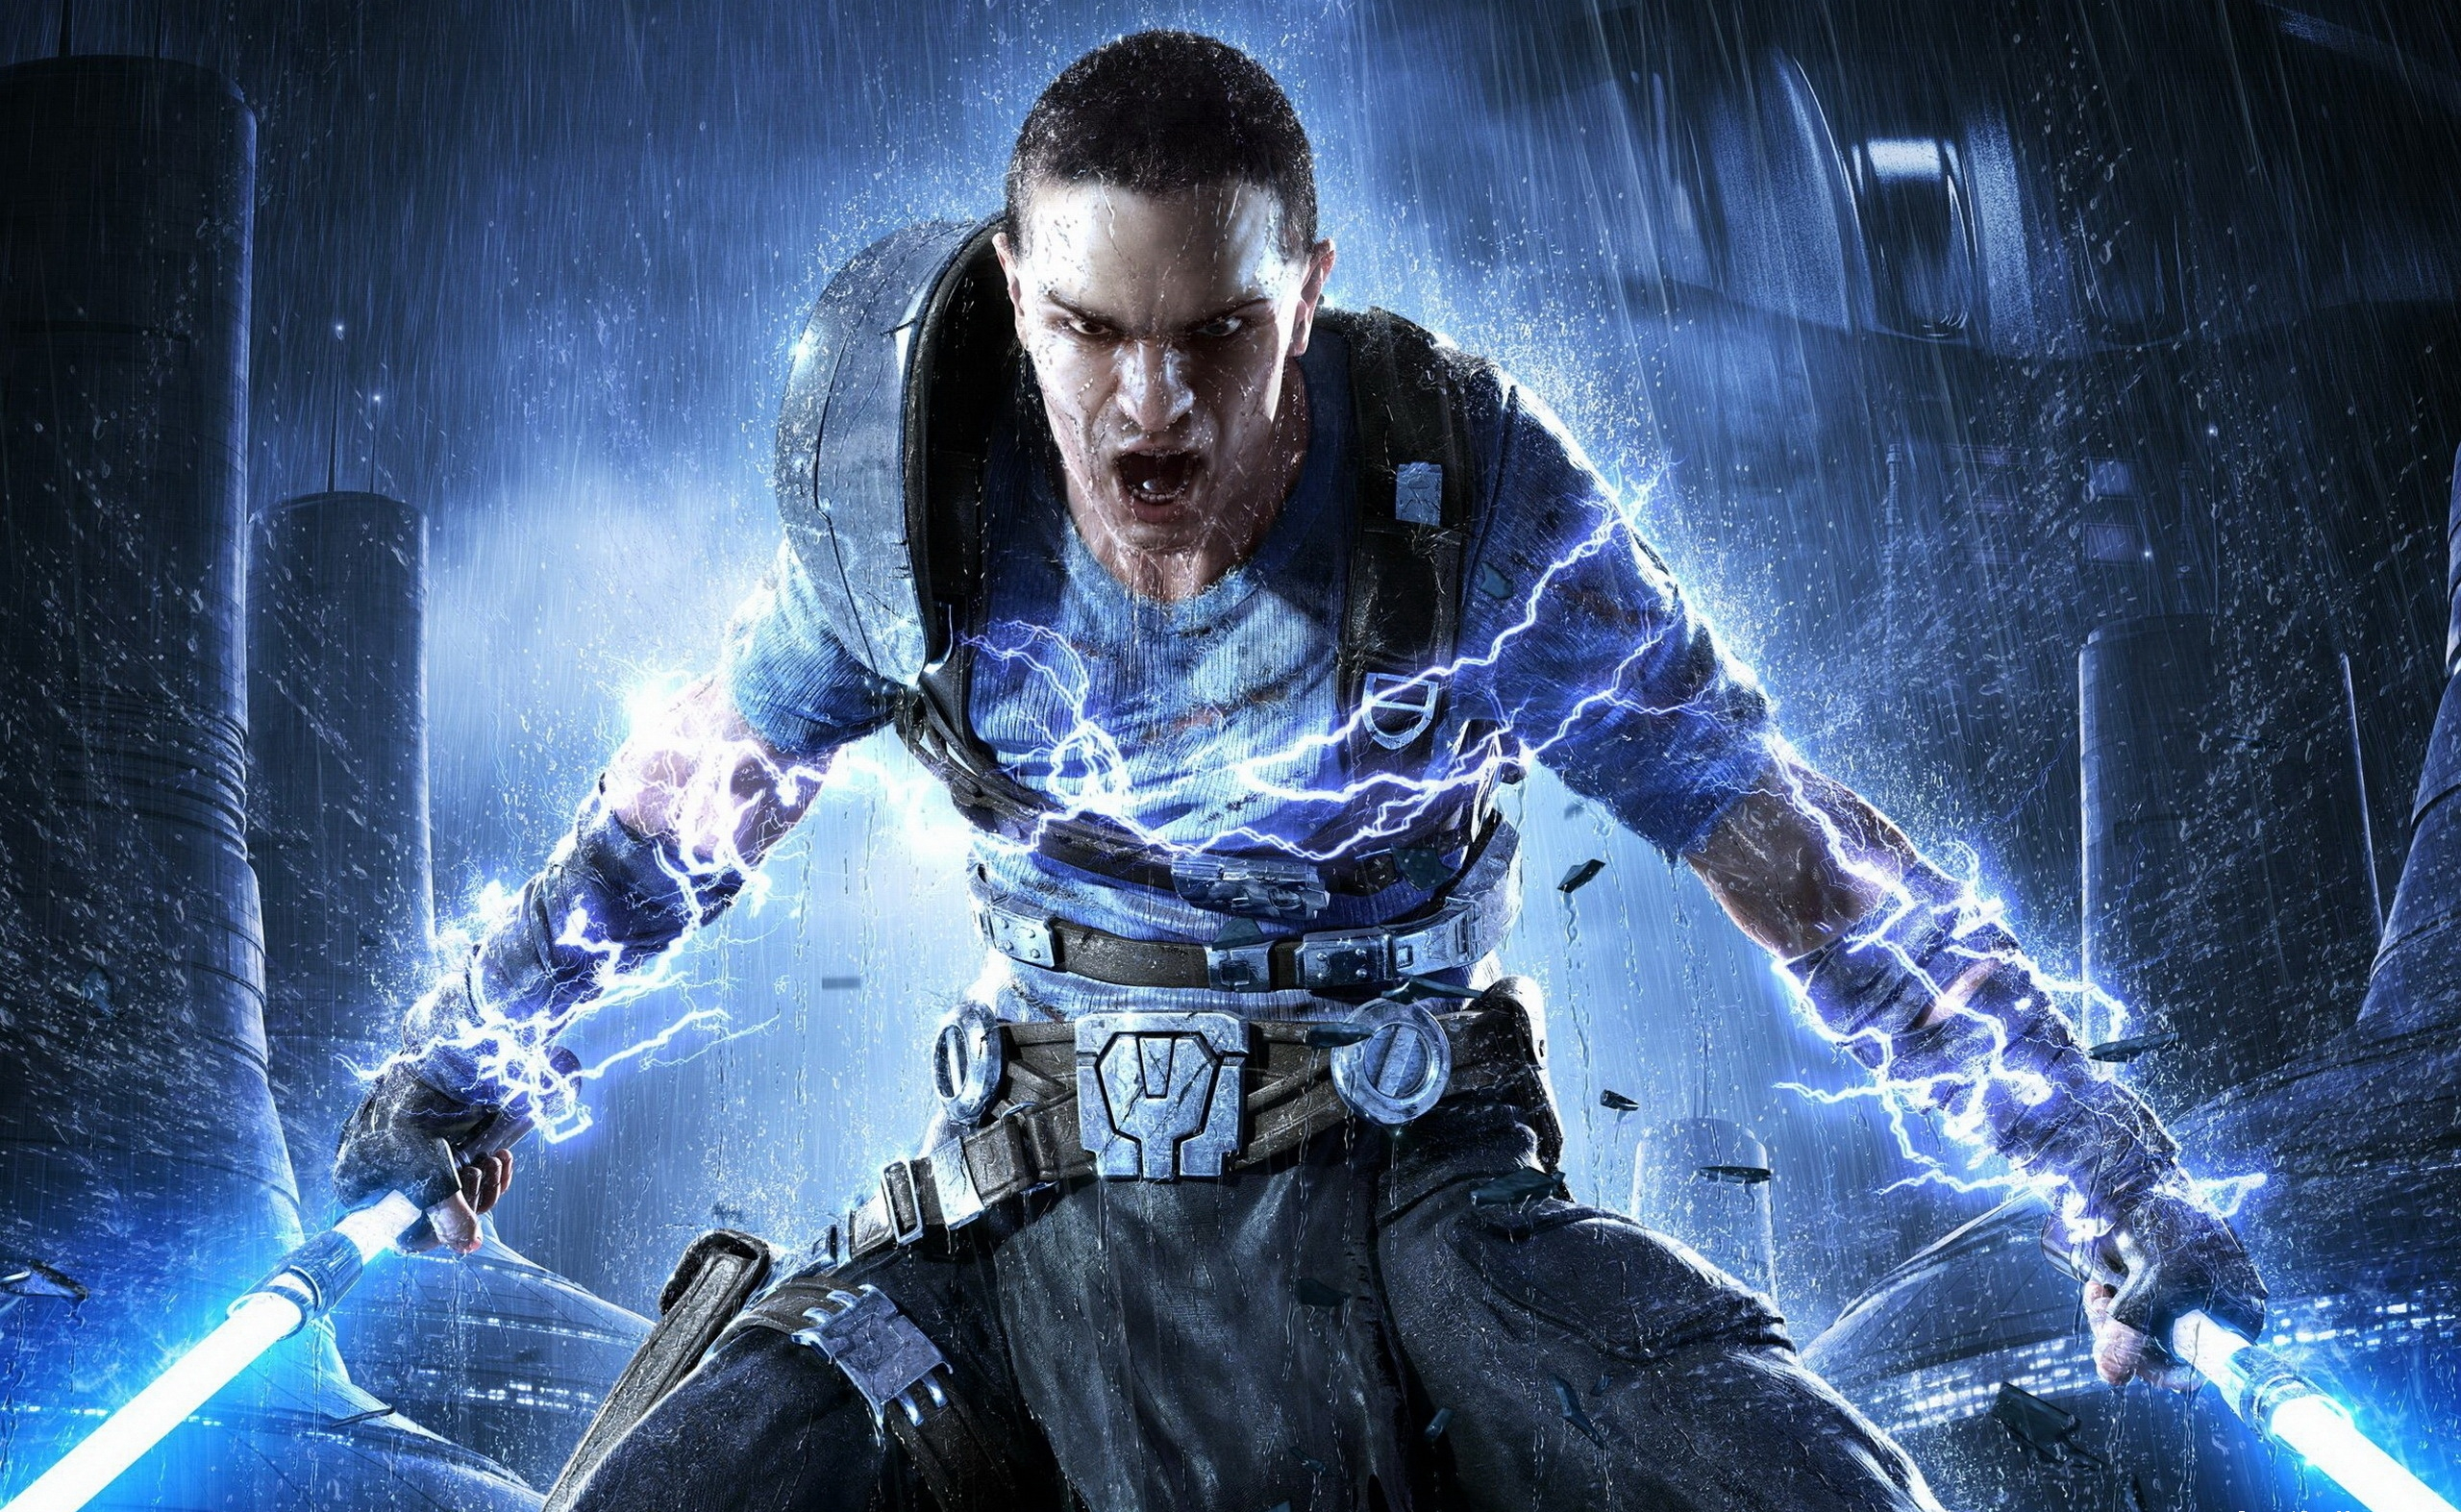 Star Wars The force Unleashed 2 wallpaper Gallery